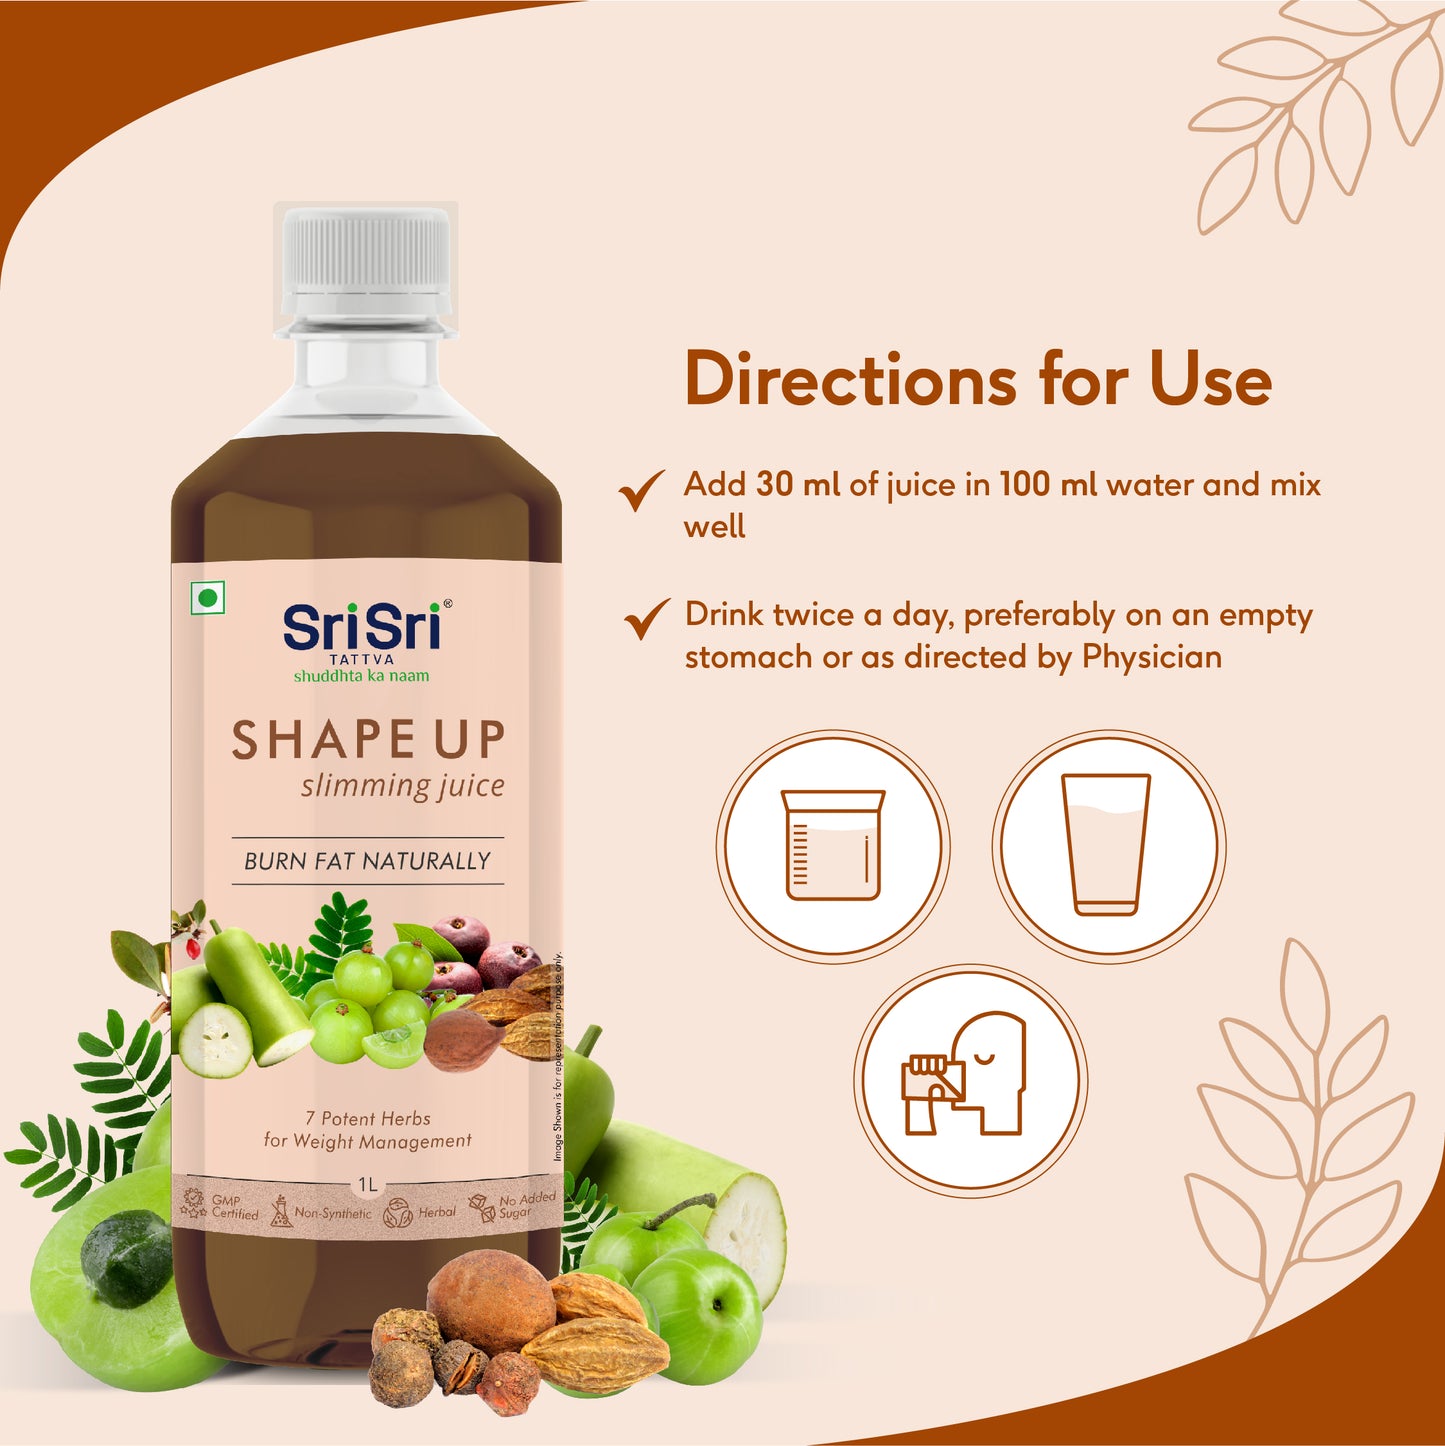 Shape Up Slimming Juice - Burn Fat Naturally | 7 Potent Herbs For Weight Management | 1 L